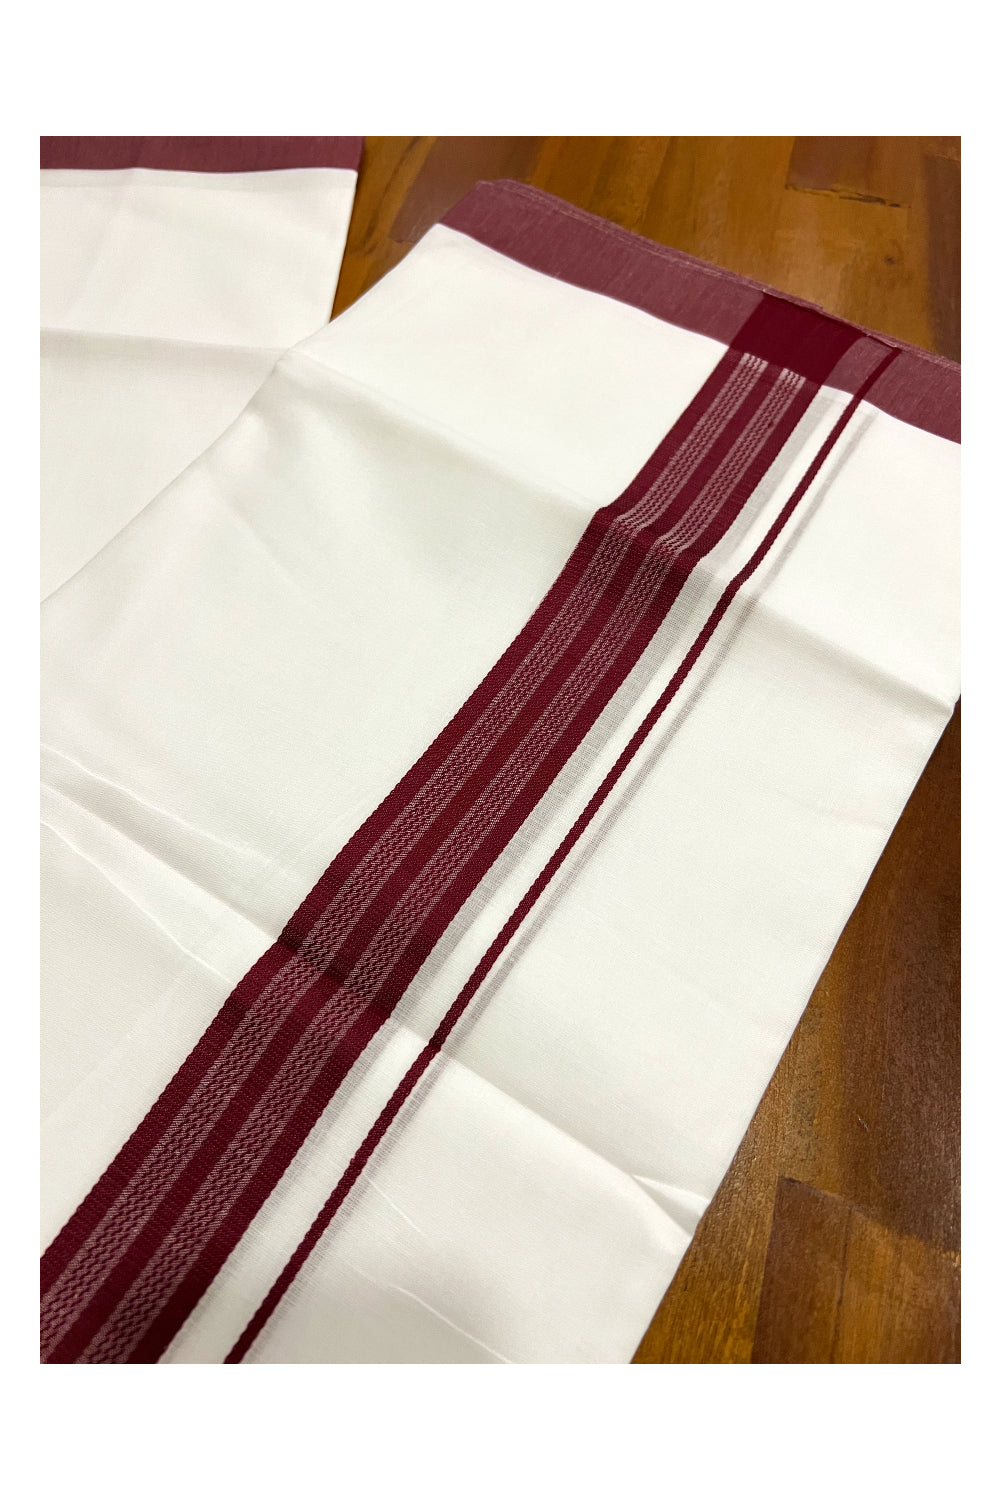 Pure White Cotton Double Mundu with Maroon Border (South Indian Dhoti)